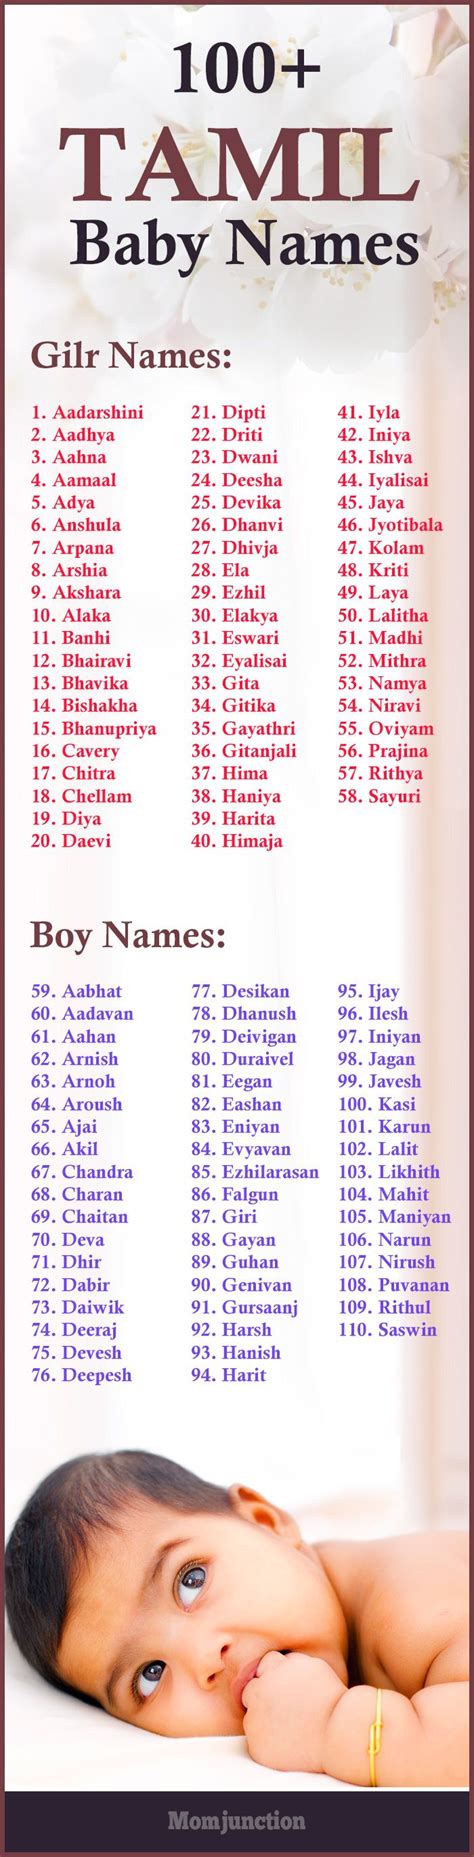 135 Modern Tamil Baby Names For Girls And Boys With Images Tamil